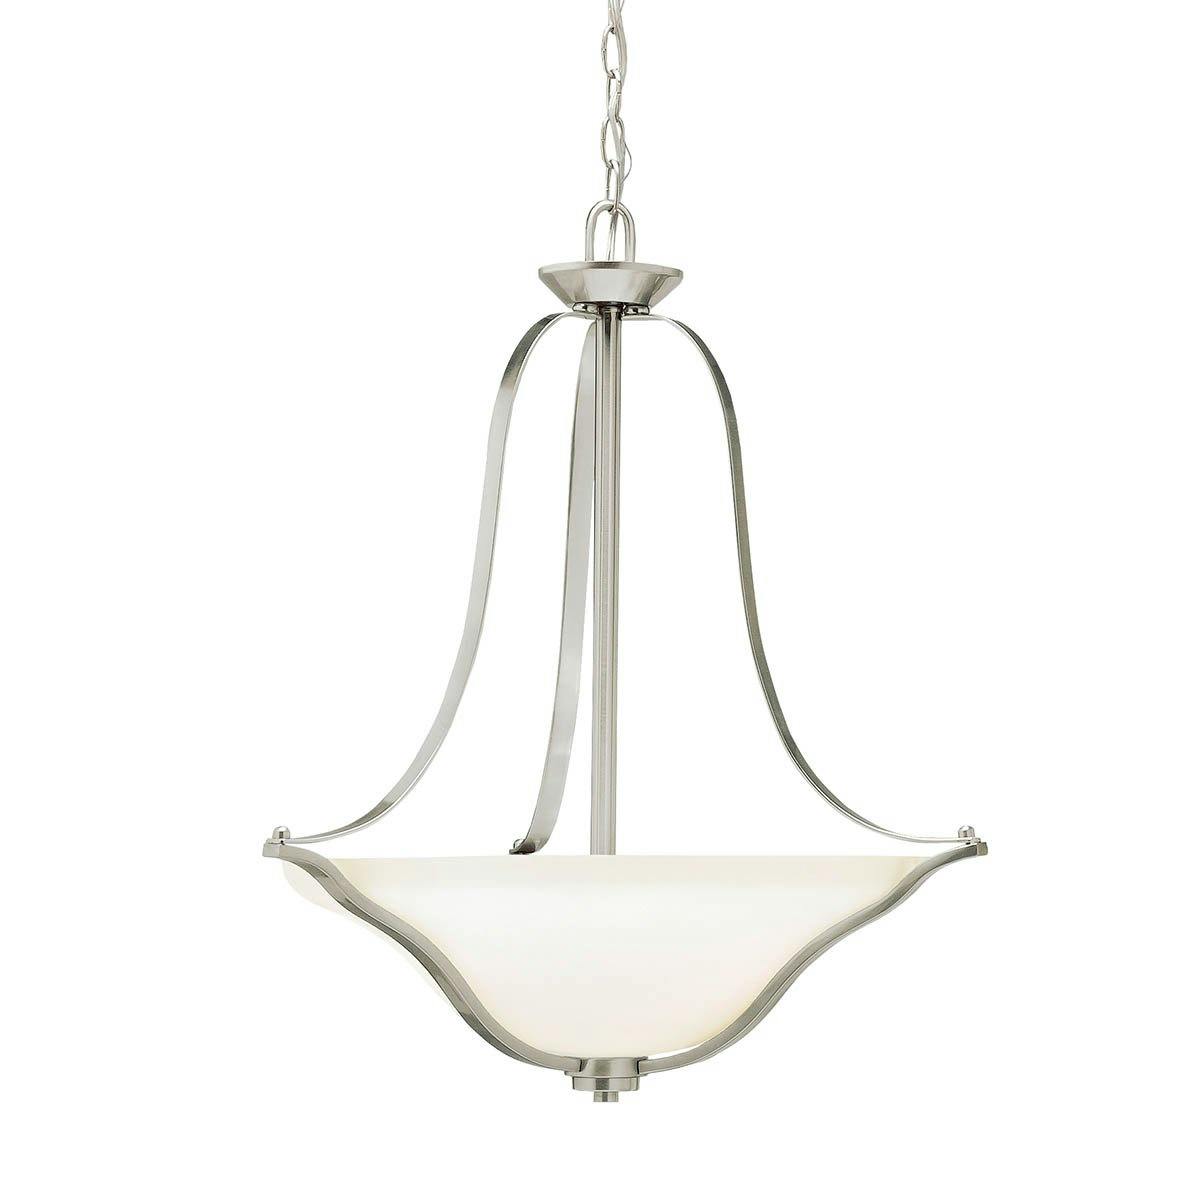 Langford 3 Light Inverted Pendant Nickel on a white background